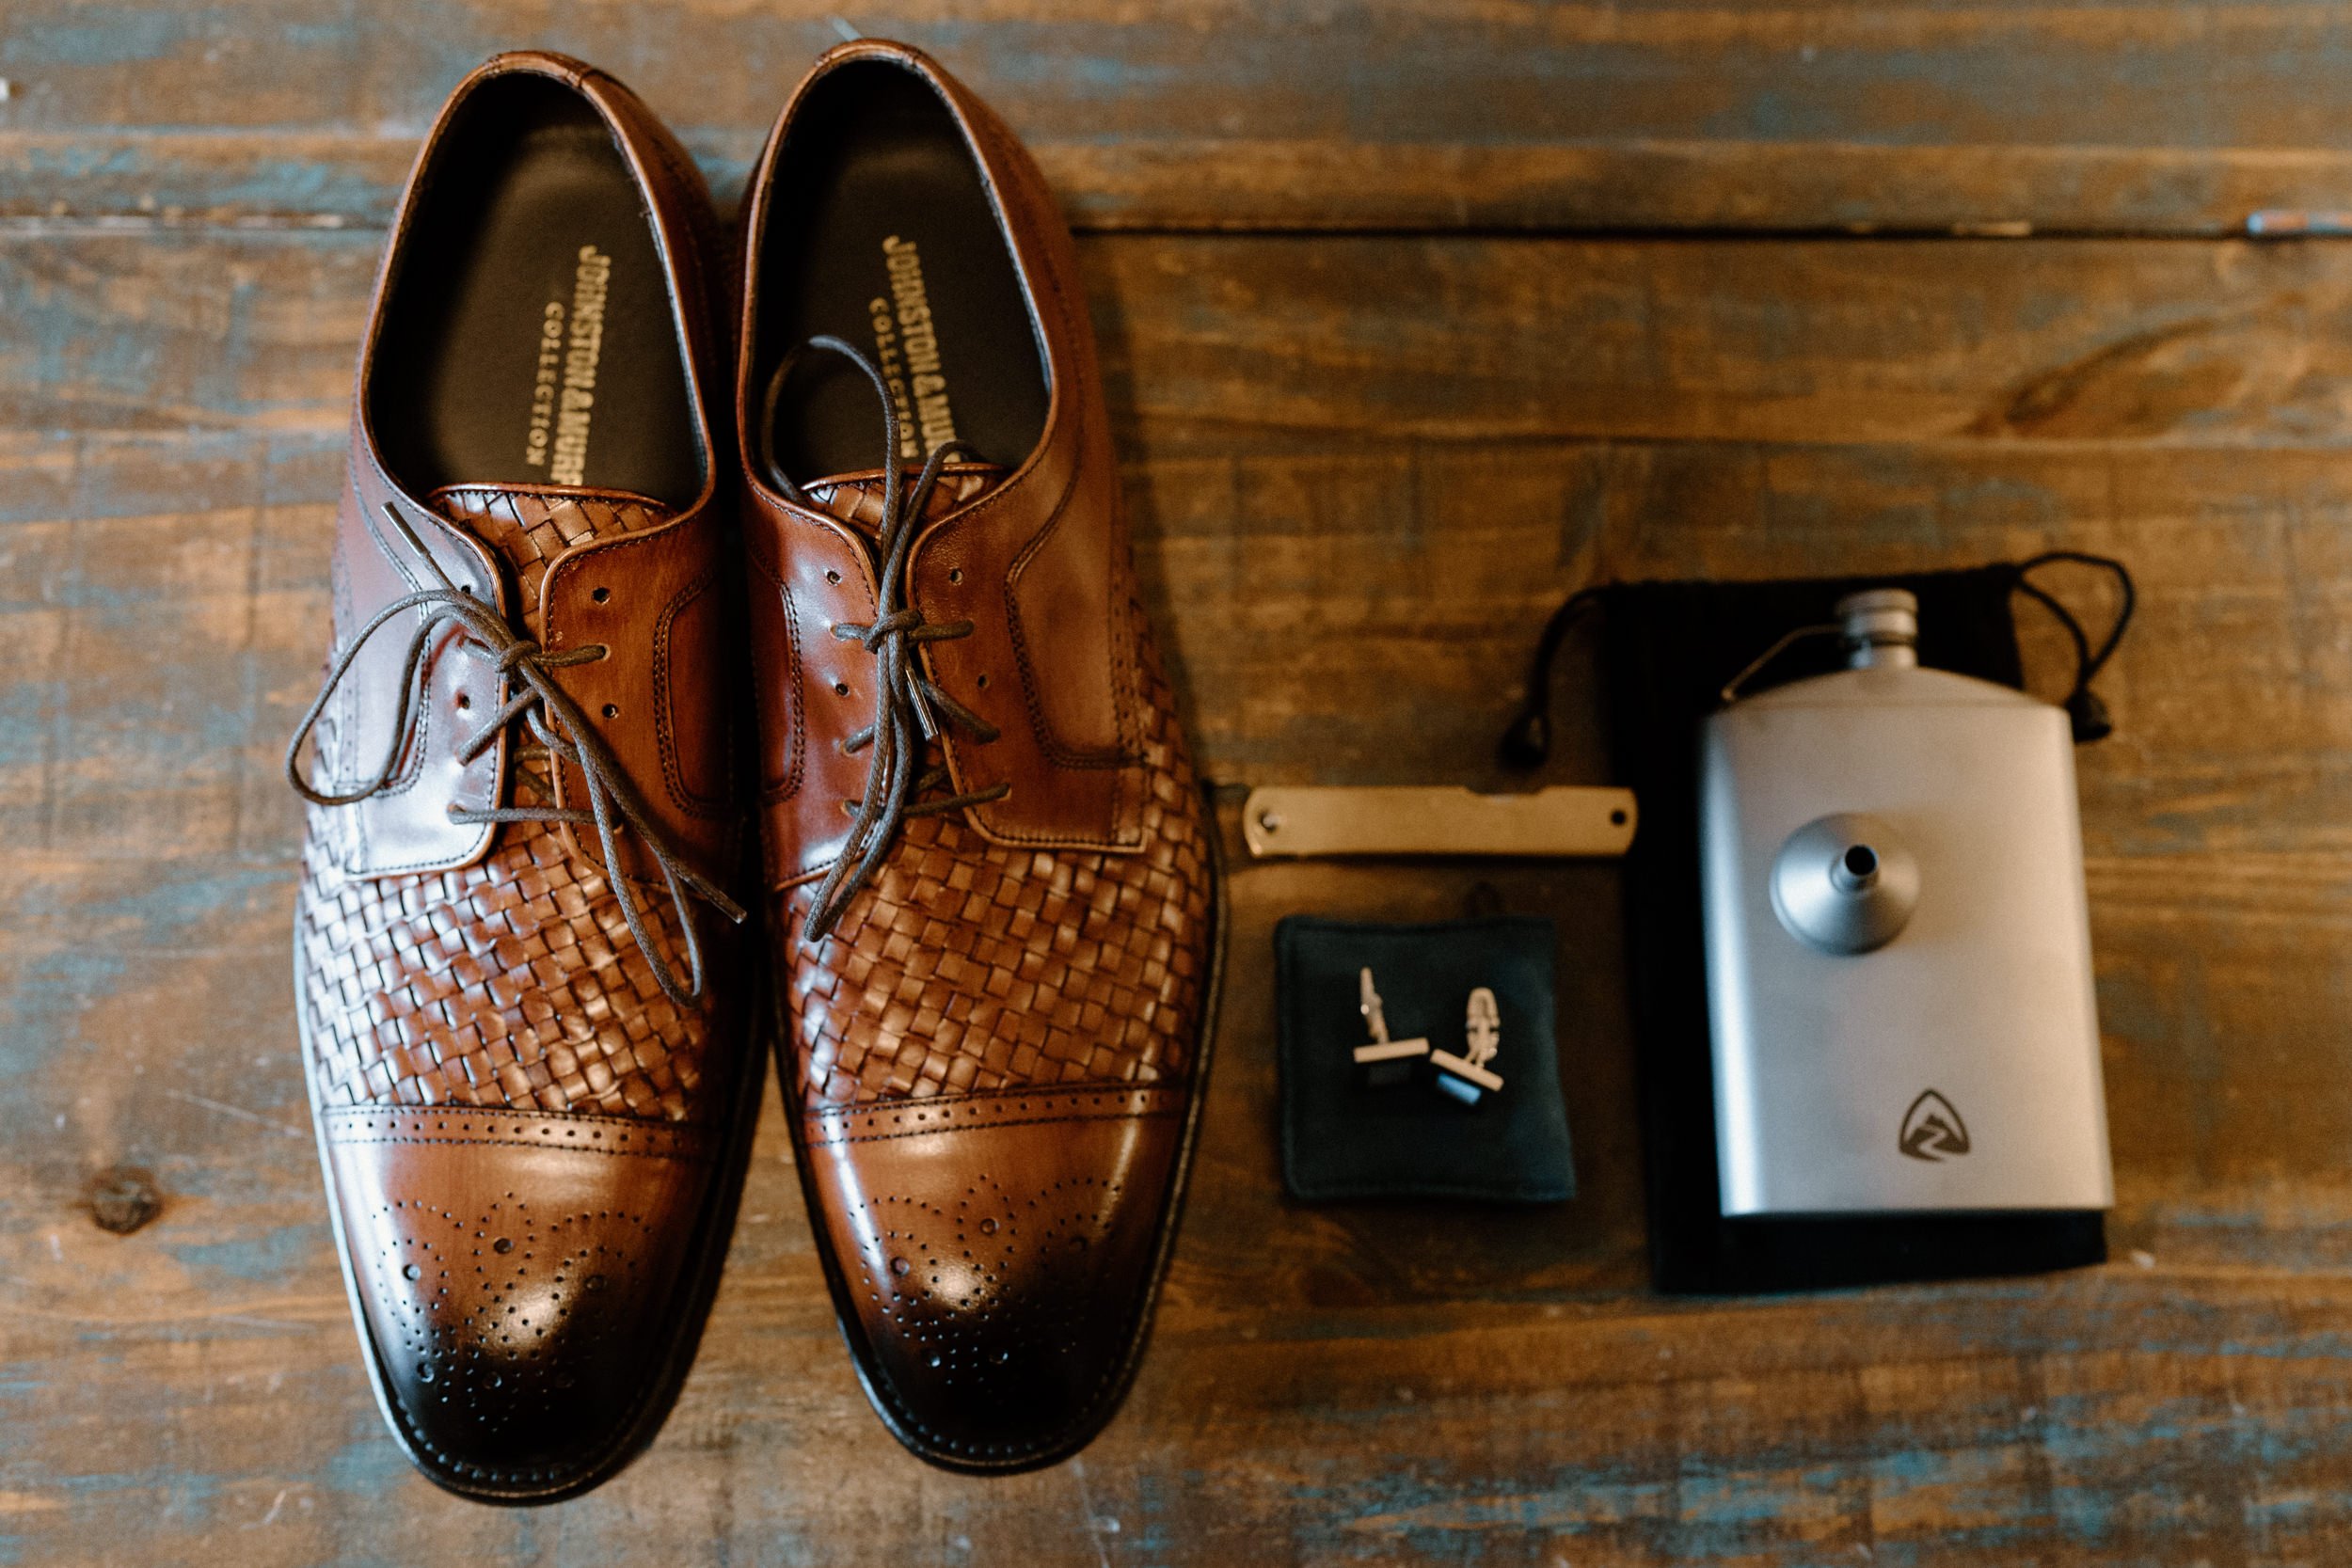 Close up of the groom's shoes, cufflinks, and flask